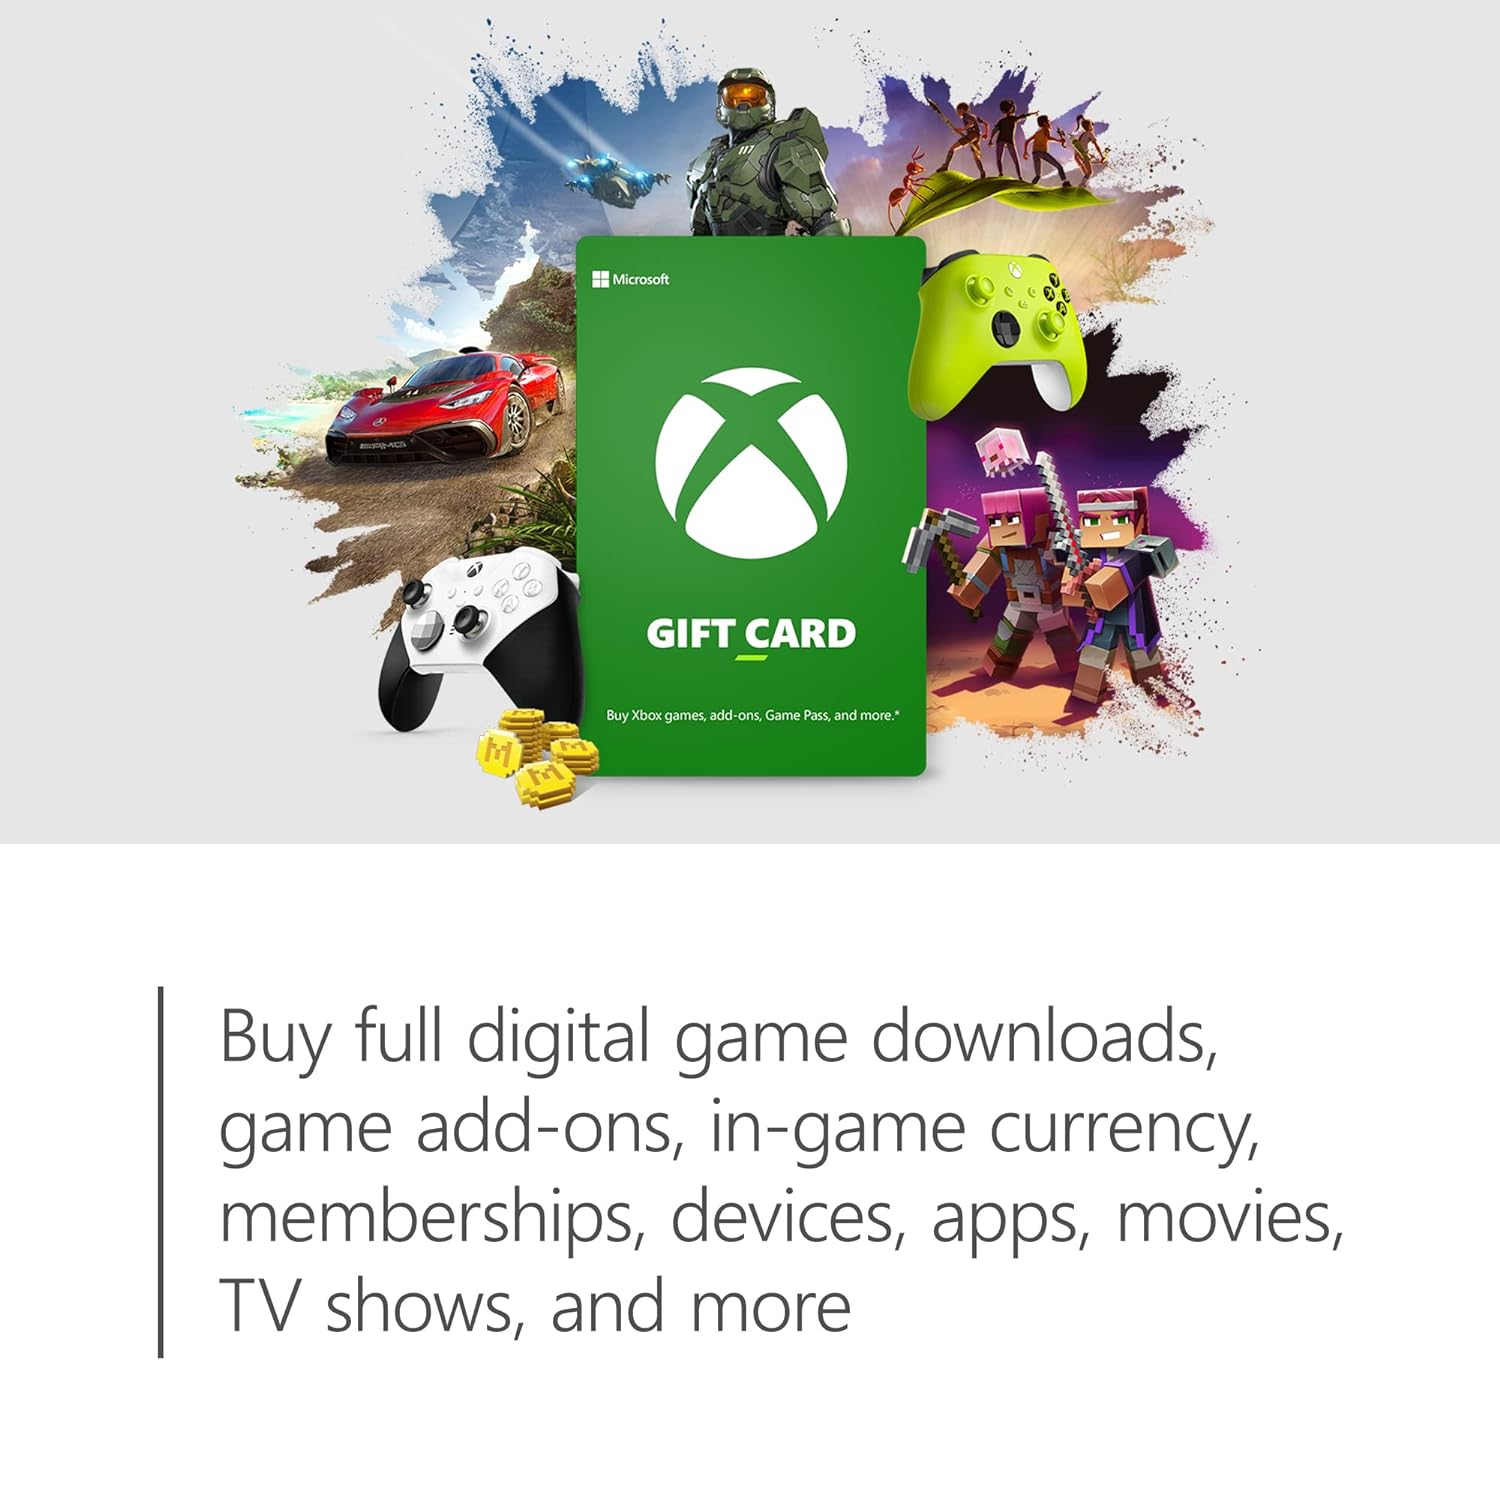 $10 Xbox Digital Gift Card | Buy full digital game downloads, game add-ons, in-game currrency, memberships, devices, apps, movies, TV shows, and more.